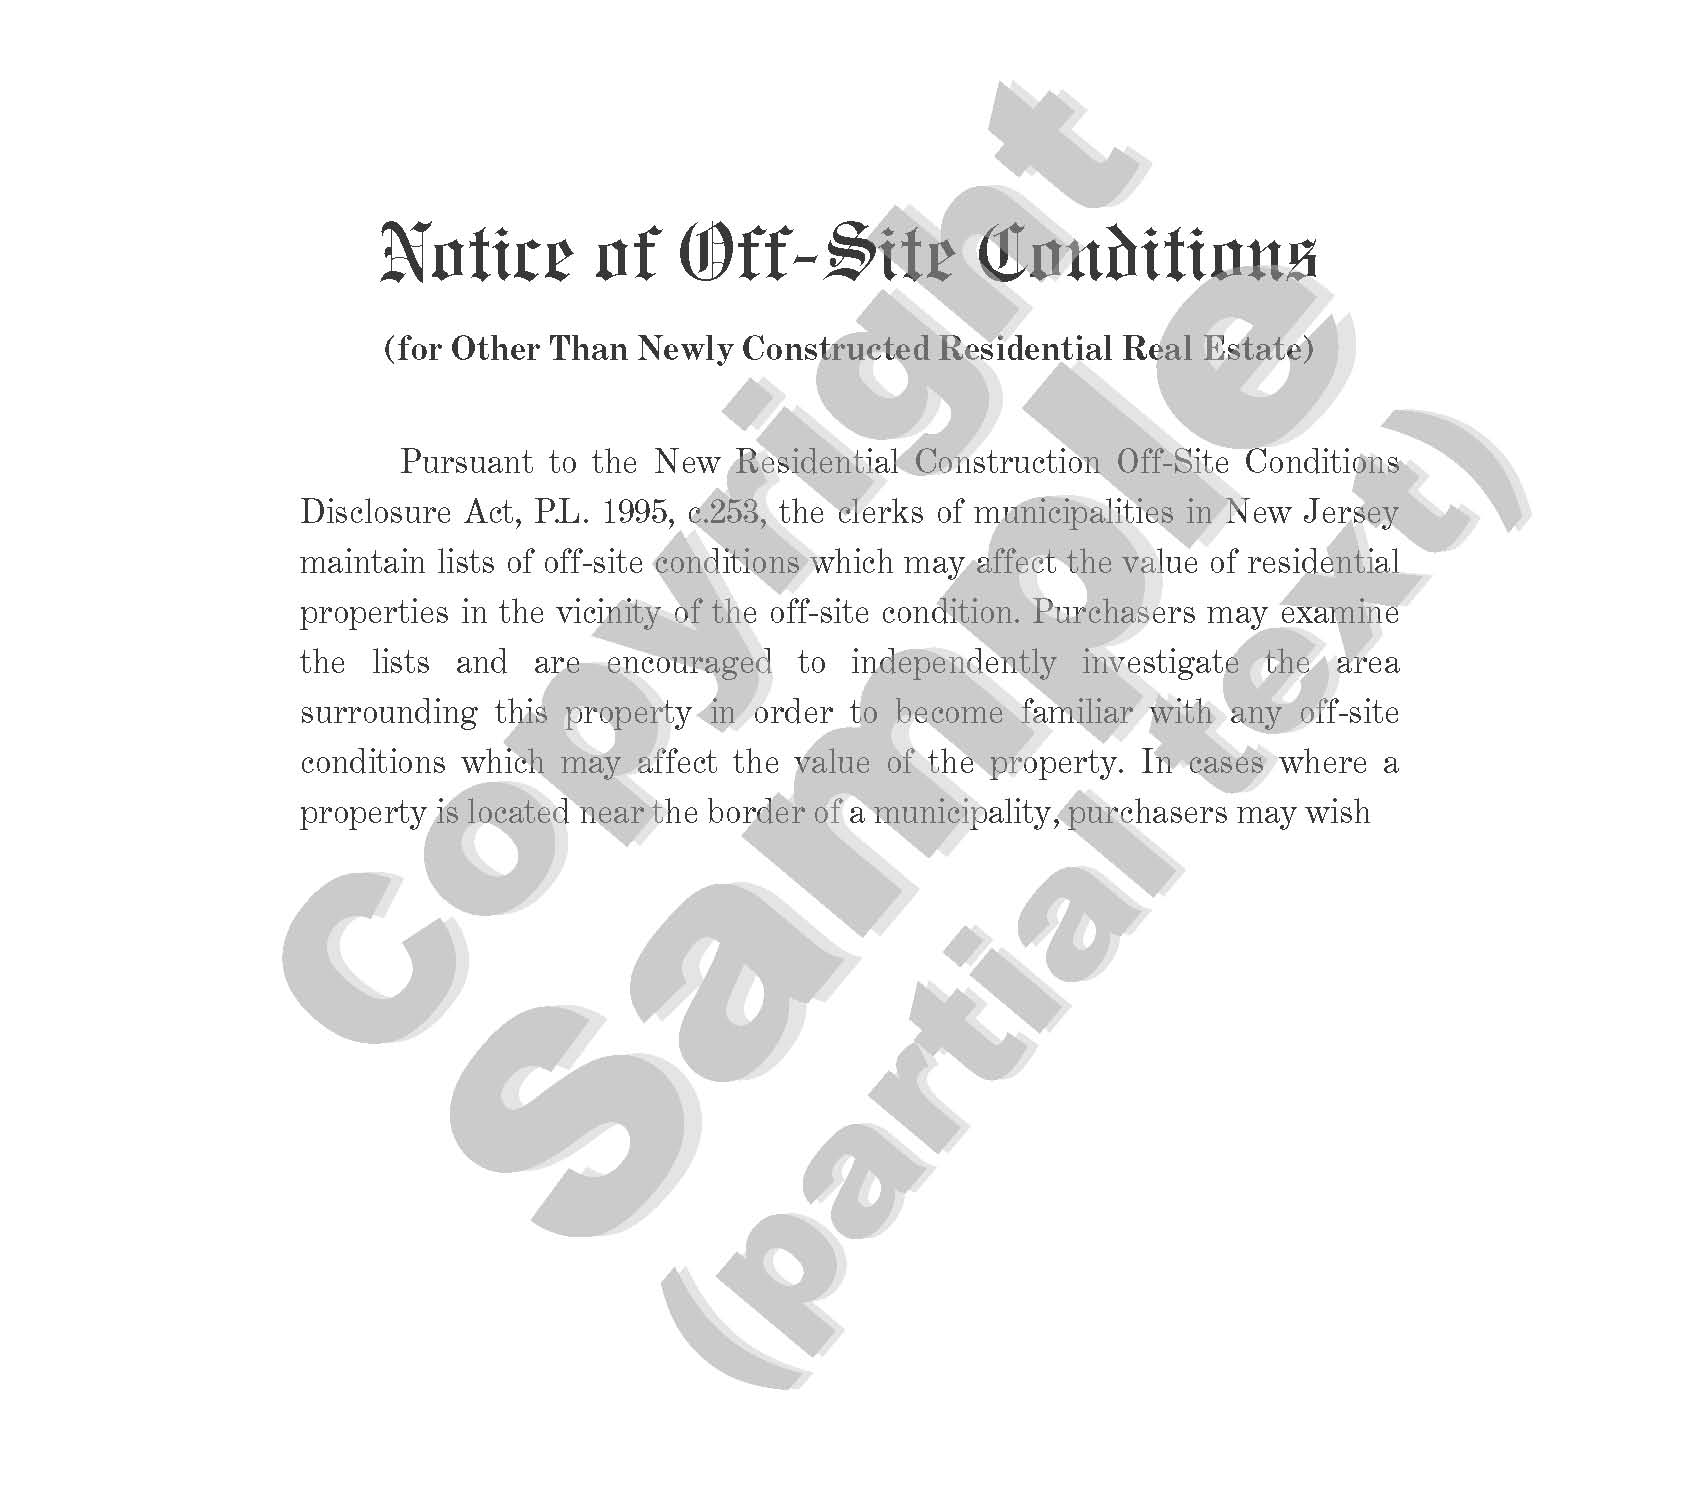 Notice of Off-Site Conditions for Other than Newly Constructed Residential Real Estate